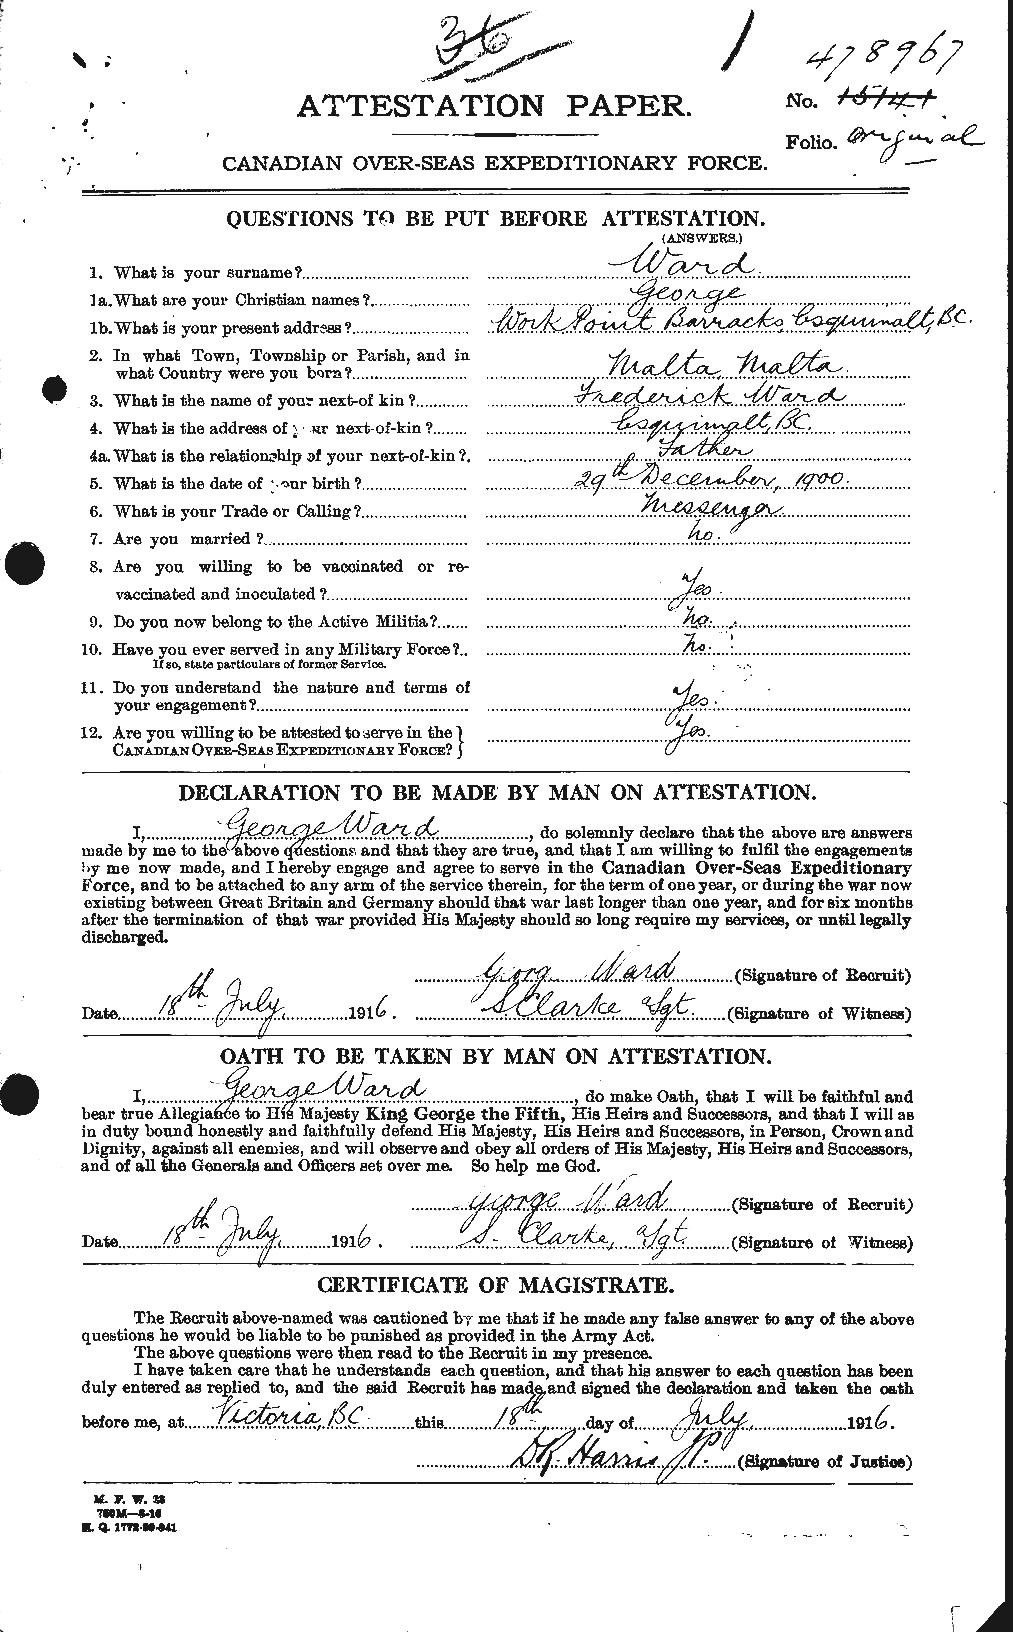 Personnel Records of the First World War - CEF 657744a